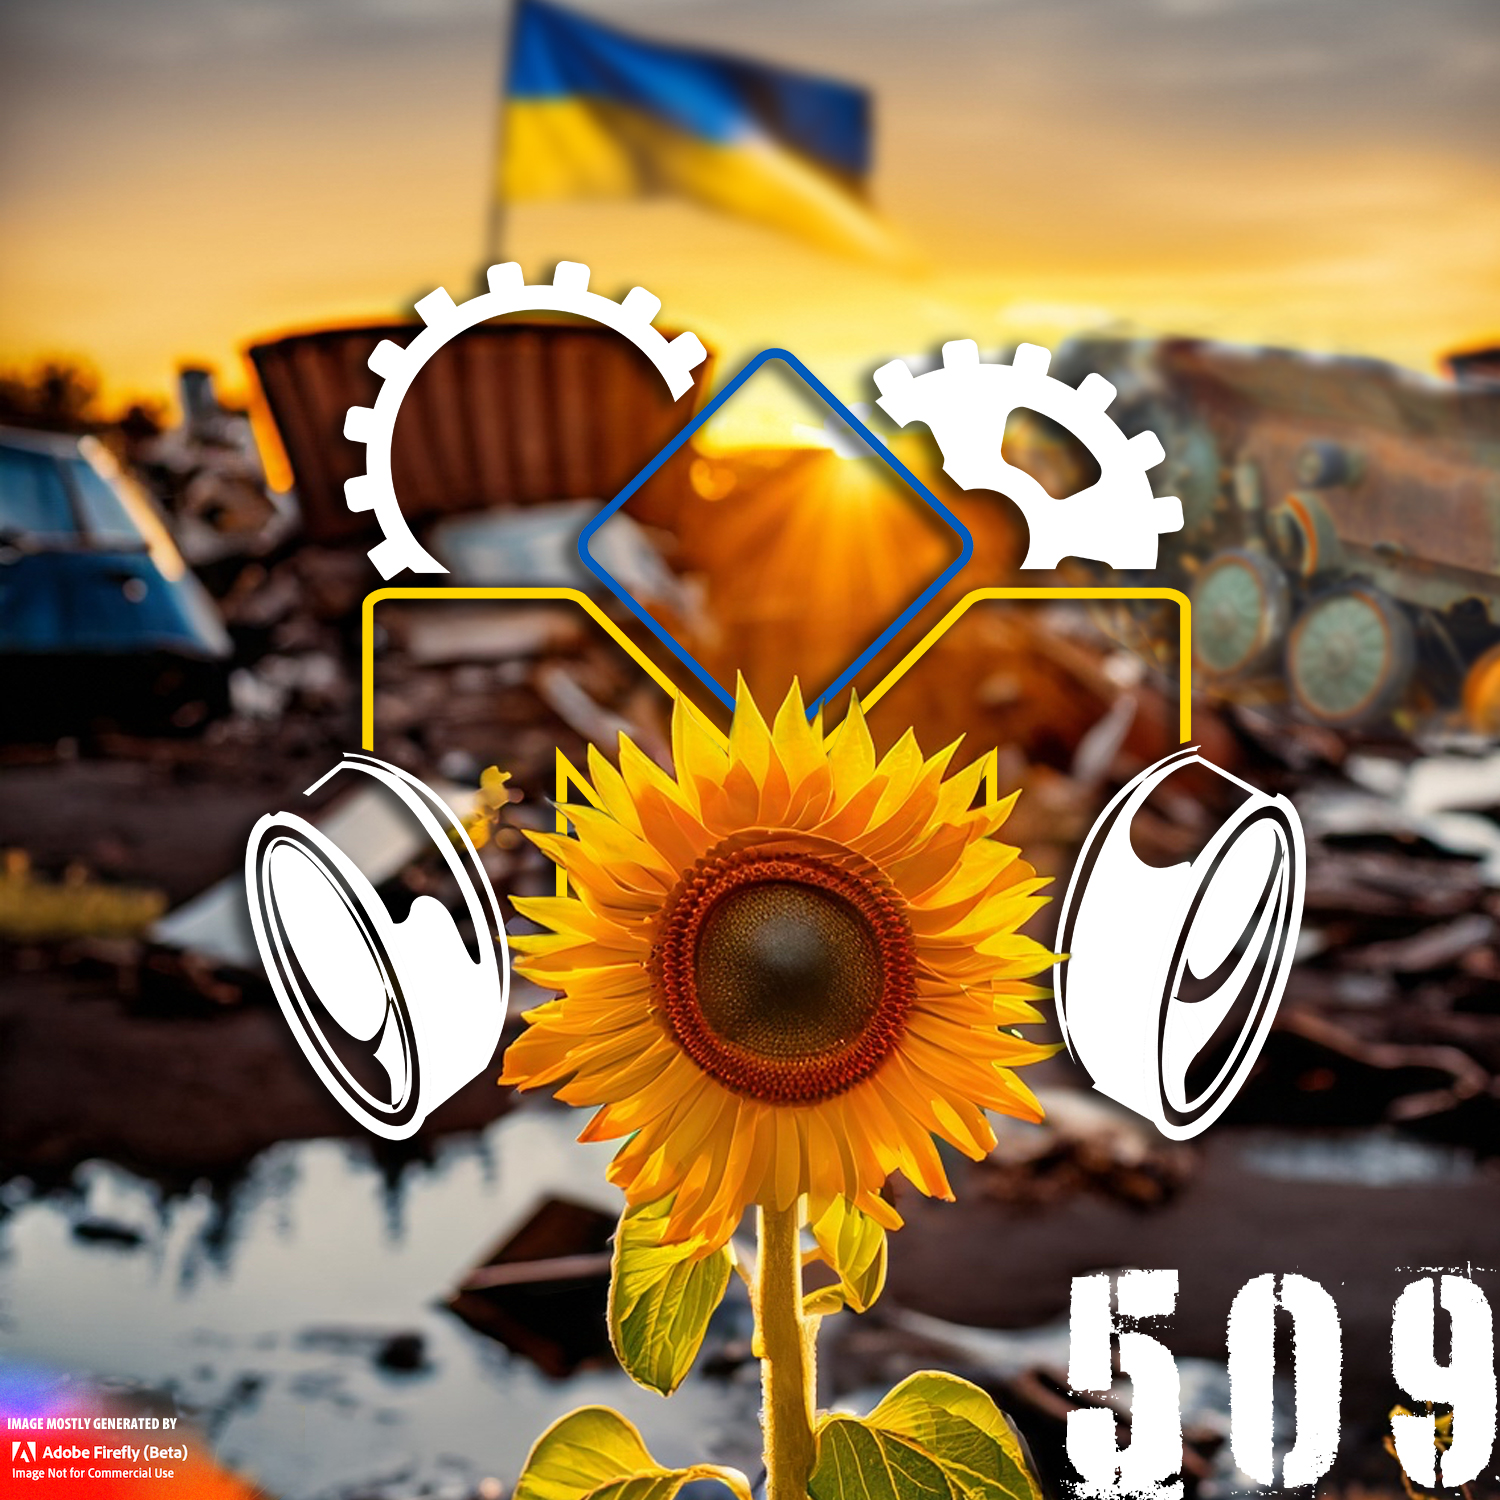 The Gothic Moose – Episode 509 – All Ukrainian bands or bands supporting Ukraine